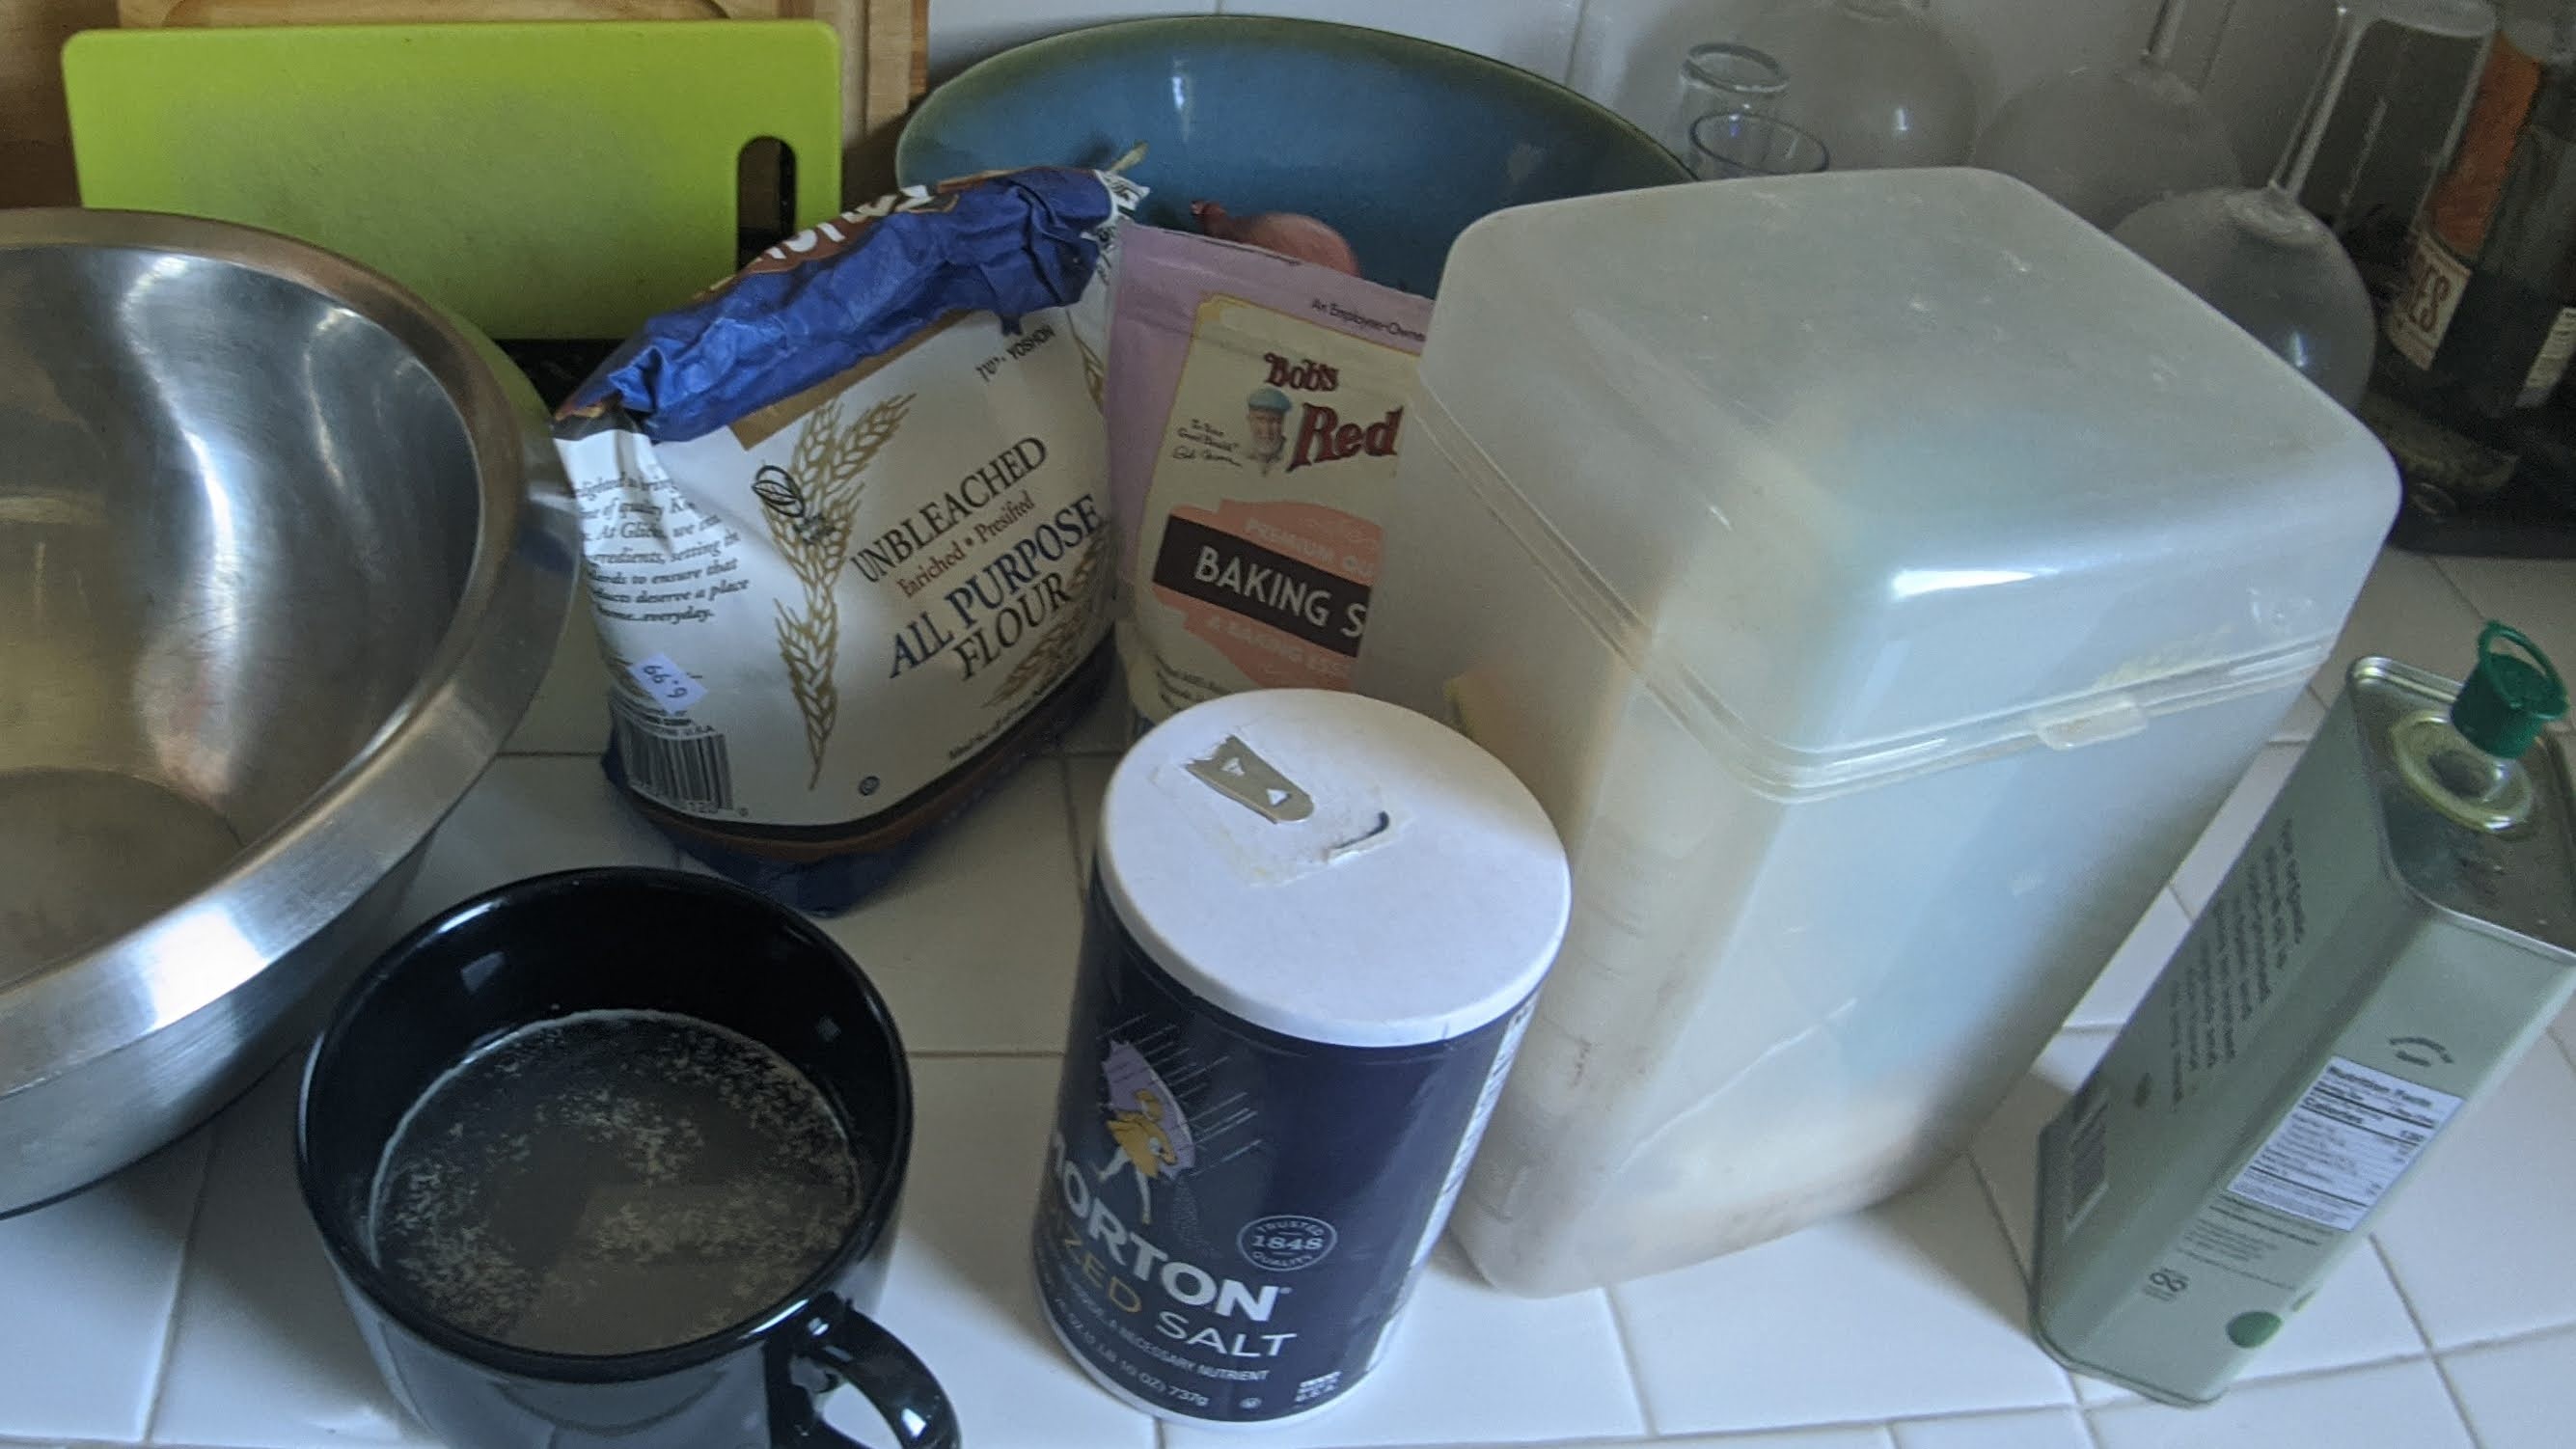 Kitchen counter is crowded with a mixing bowl & ingredients, such as salt. flour, & baking soda.